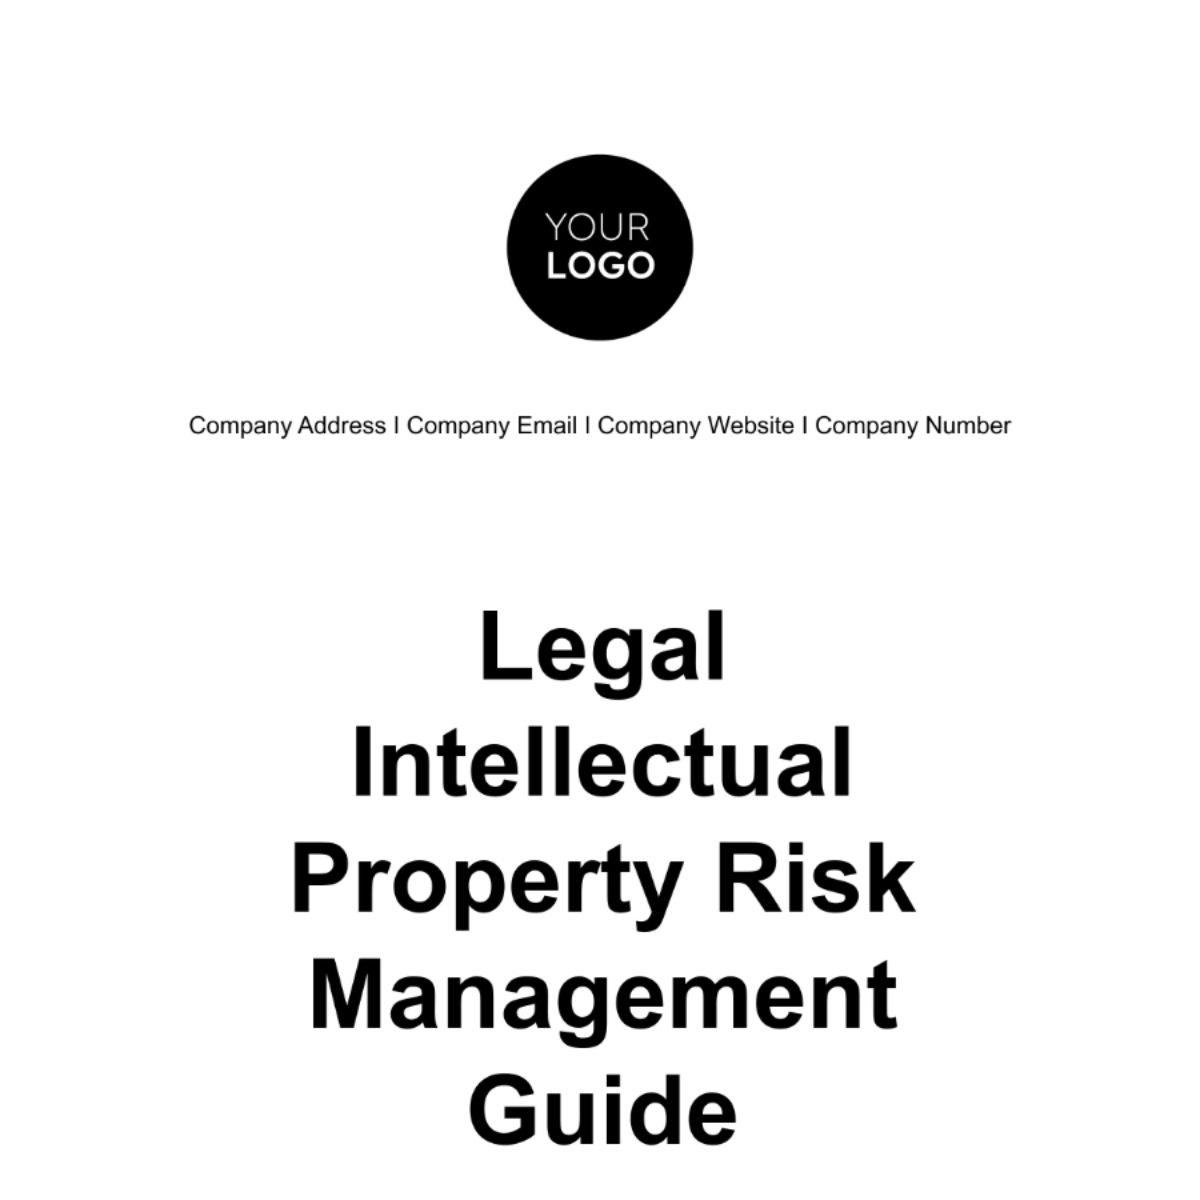 Free Legal Intellectual Property Risk Management Guide Template